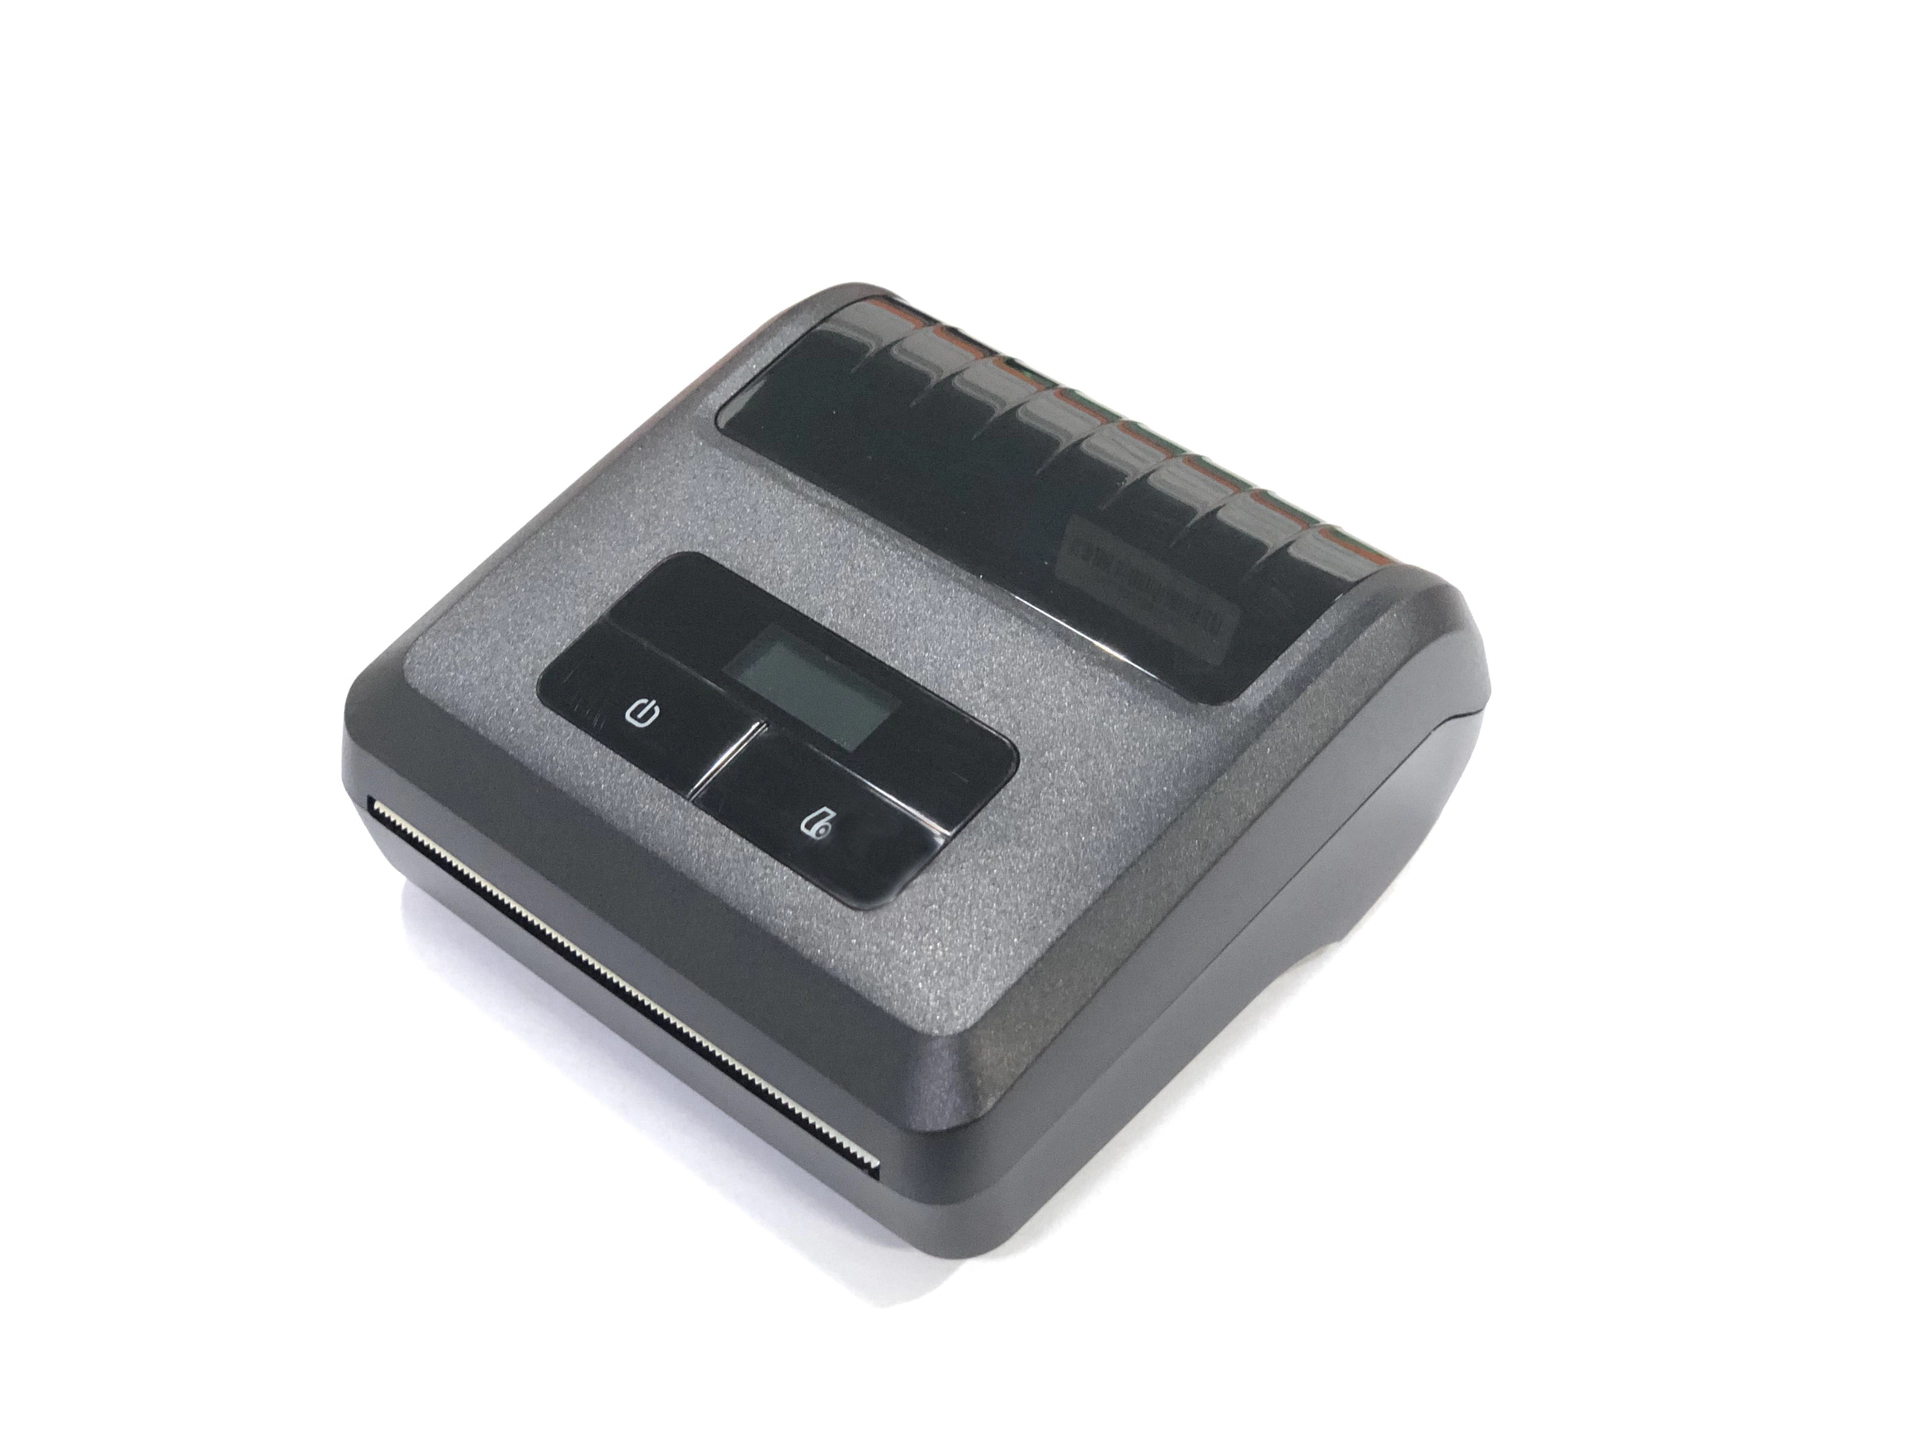 3inch Portable Mobile Mini Bluetooth Label Printer For Android and IOS